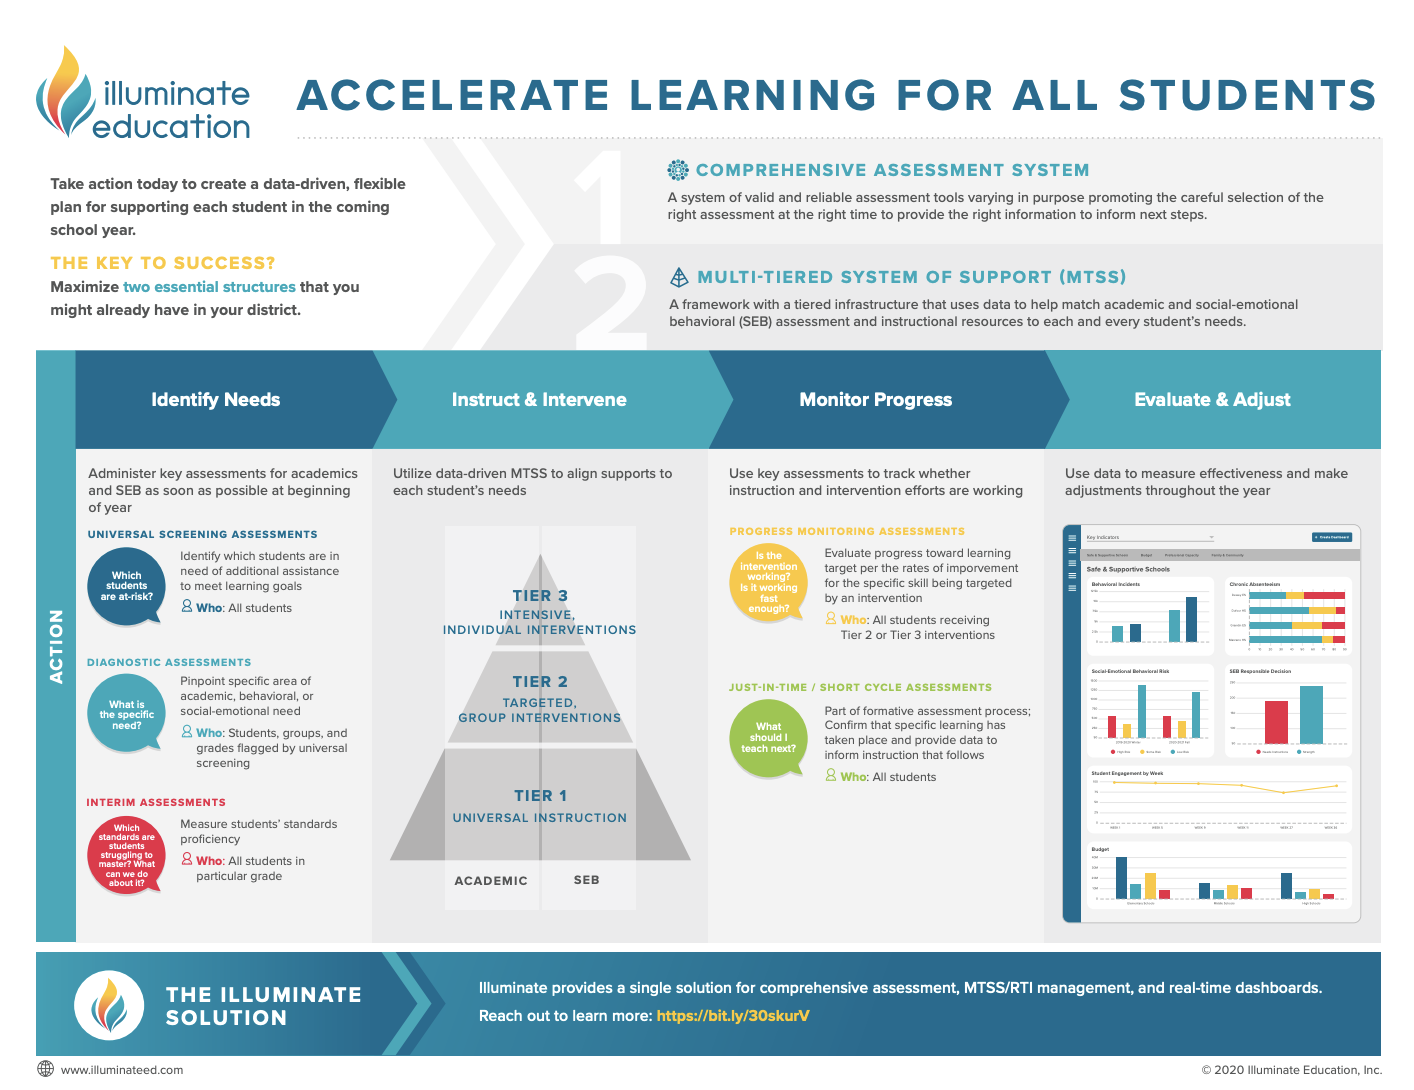 Accelerate Learning for All Students